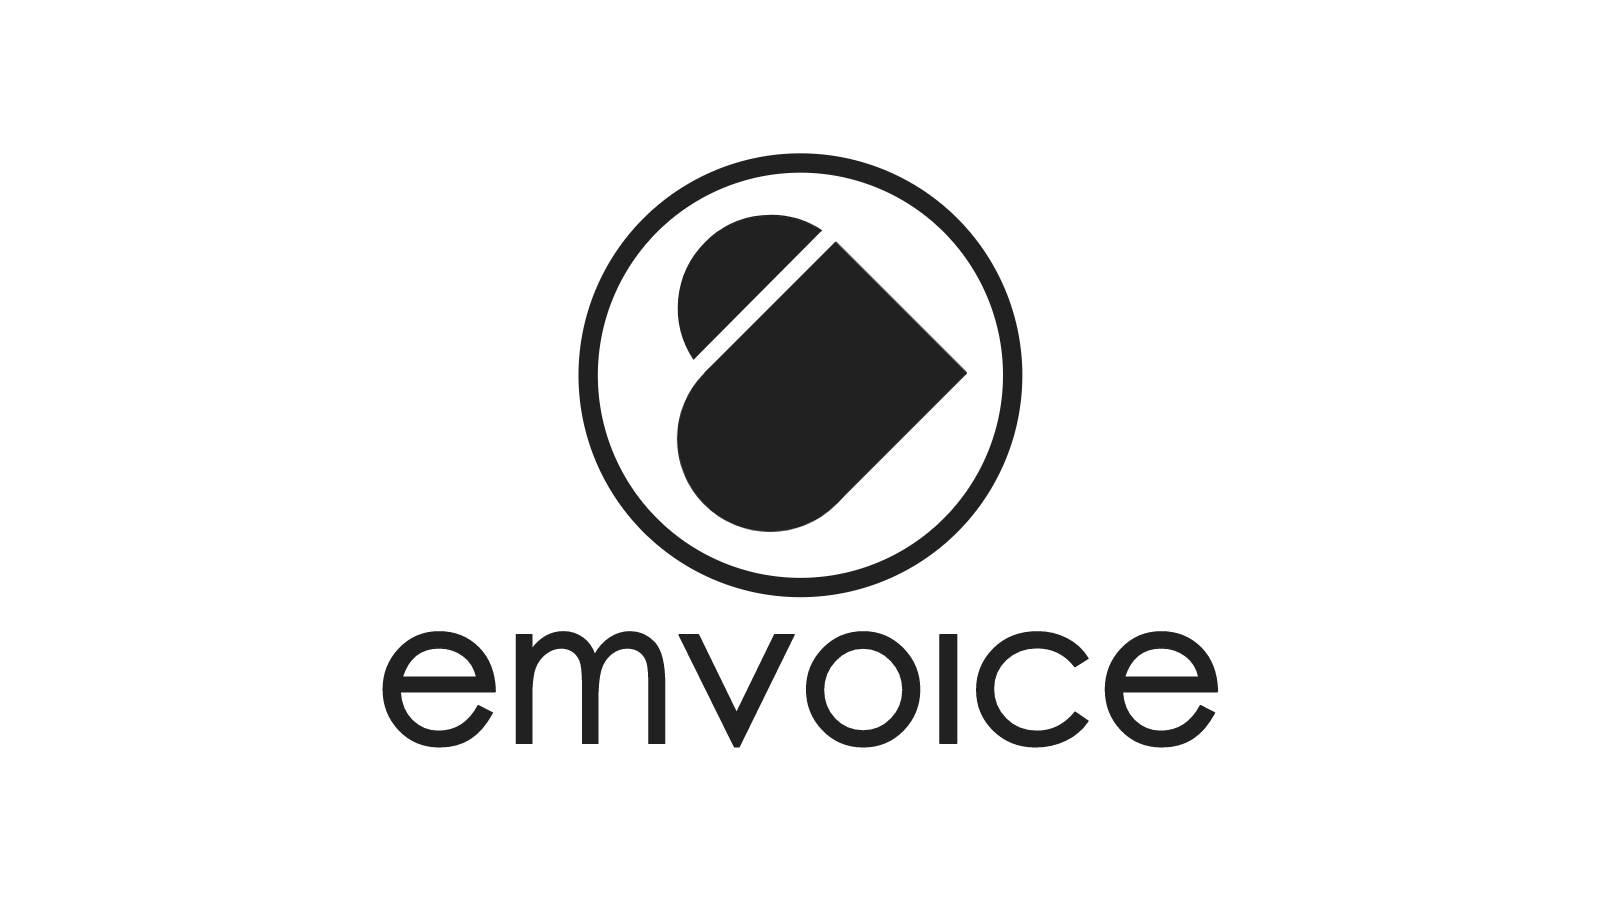 Emvoice - A daw plugin to generate realistic vocal performances from text